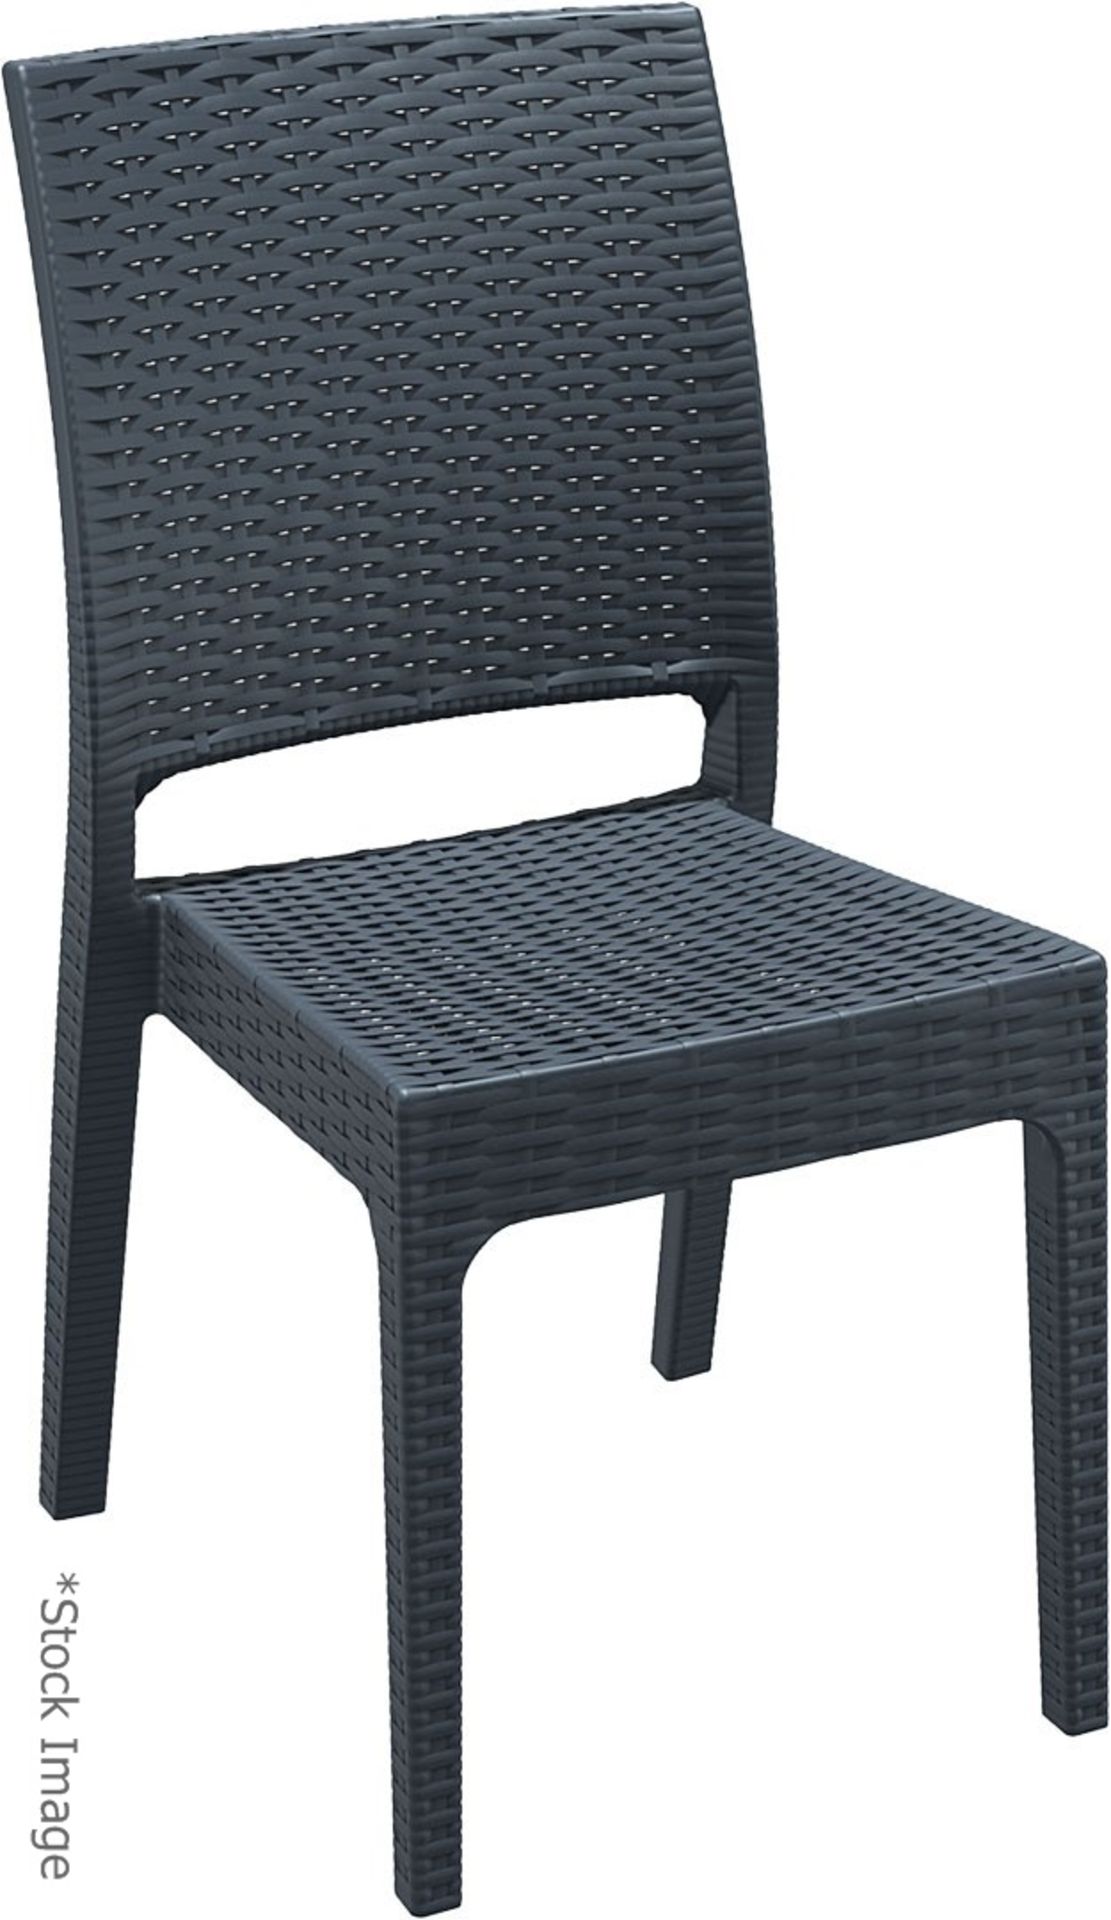 4 x SIESTA EXCLUSIVE 'Florida' Commercial Stackable Rattan-style Chairs In Dark Grey - RRP £320.00 - Image 5 of 13